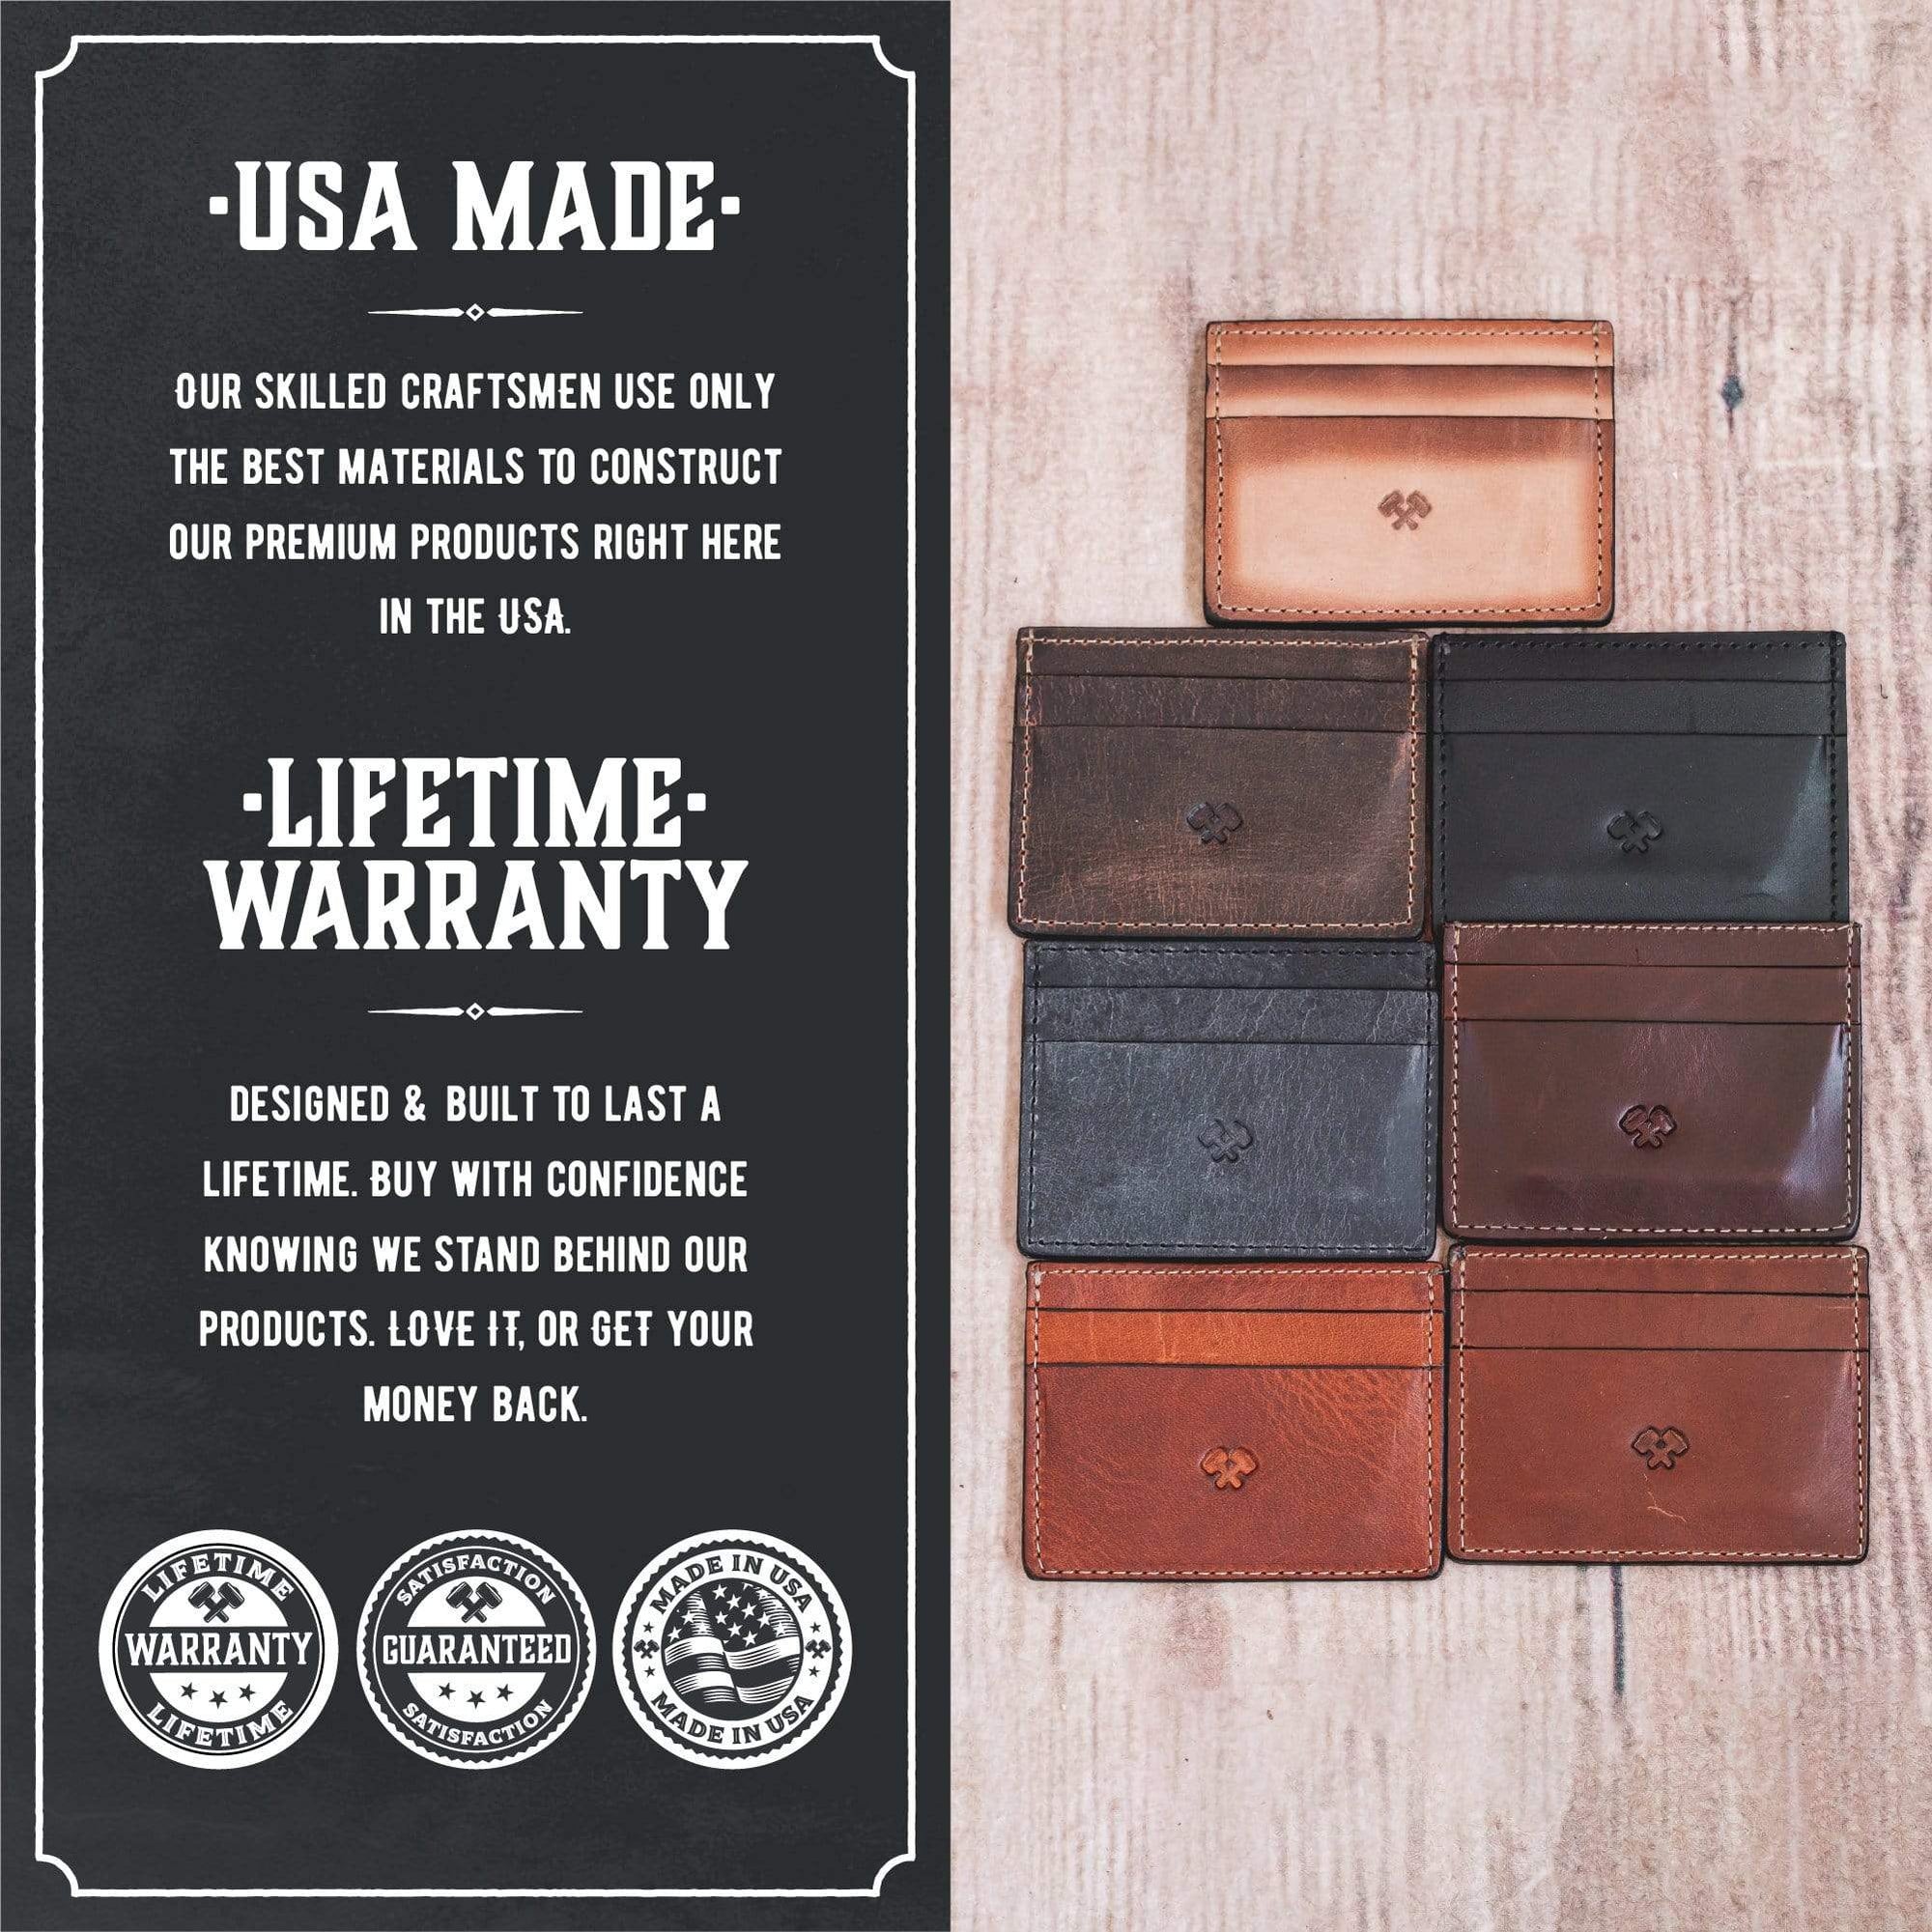 Main Street Forge Wallet Men's Slim Wallet | Front Pocket Wallet with 5 Slots | Minimalist Design | Made in USA